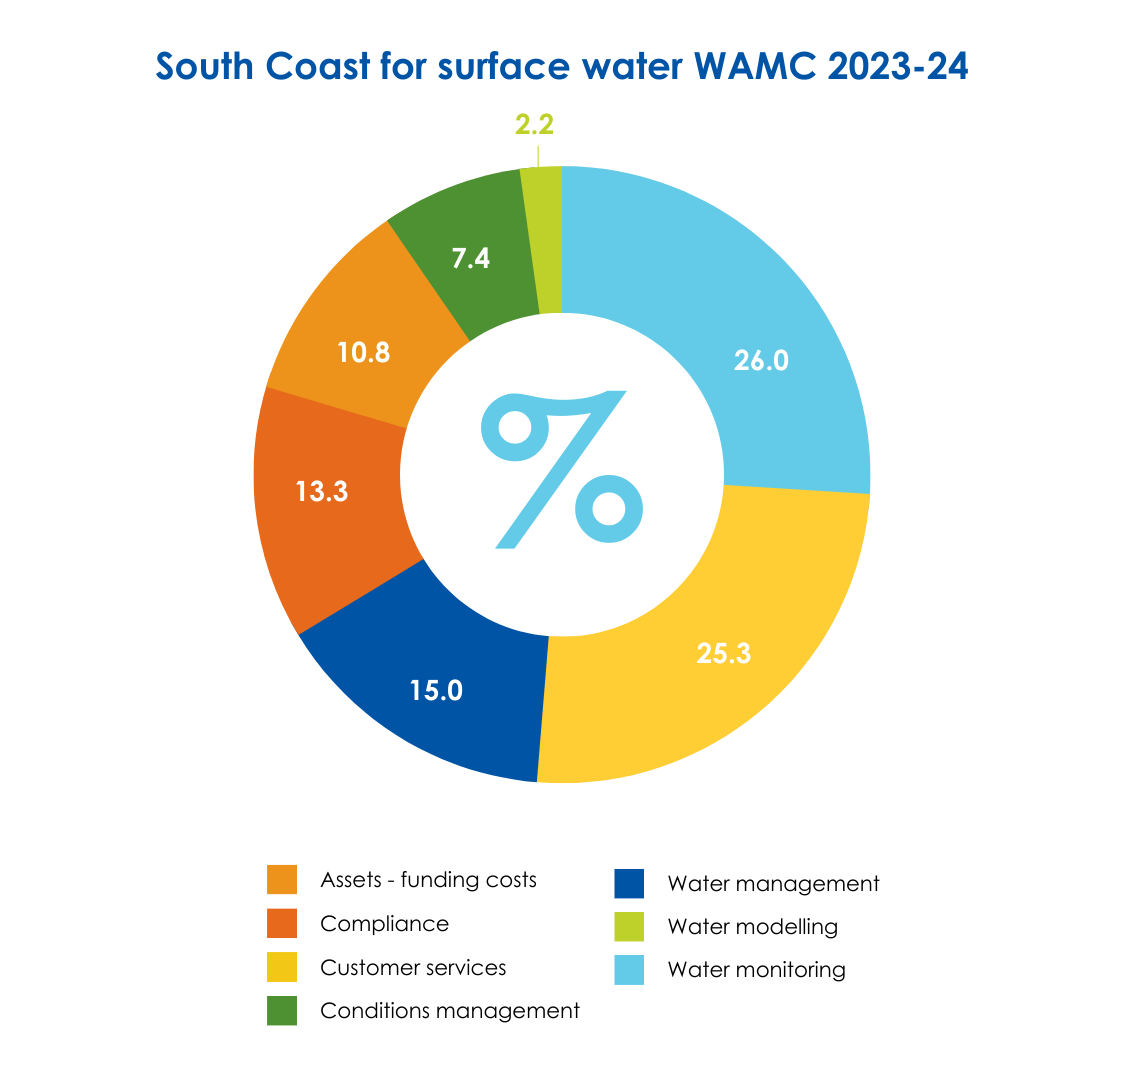 South coast for surface water WAMC 2023-24